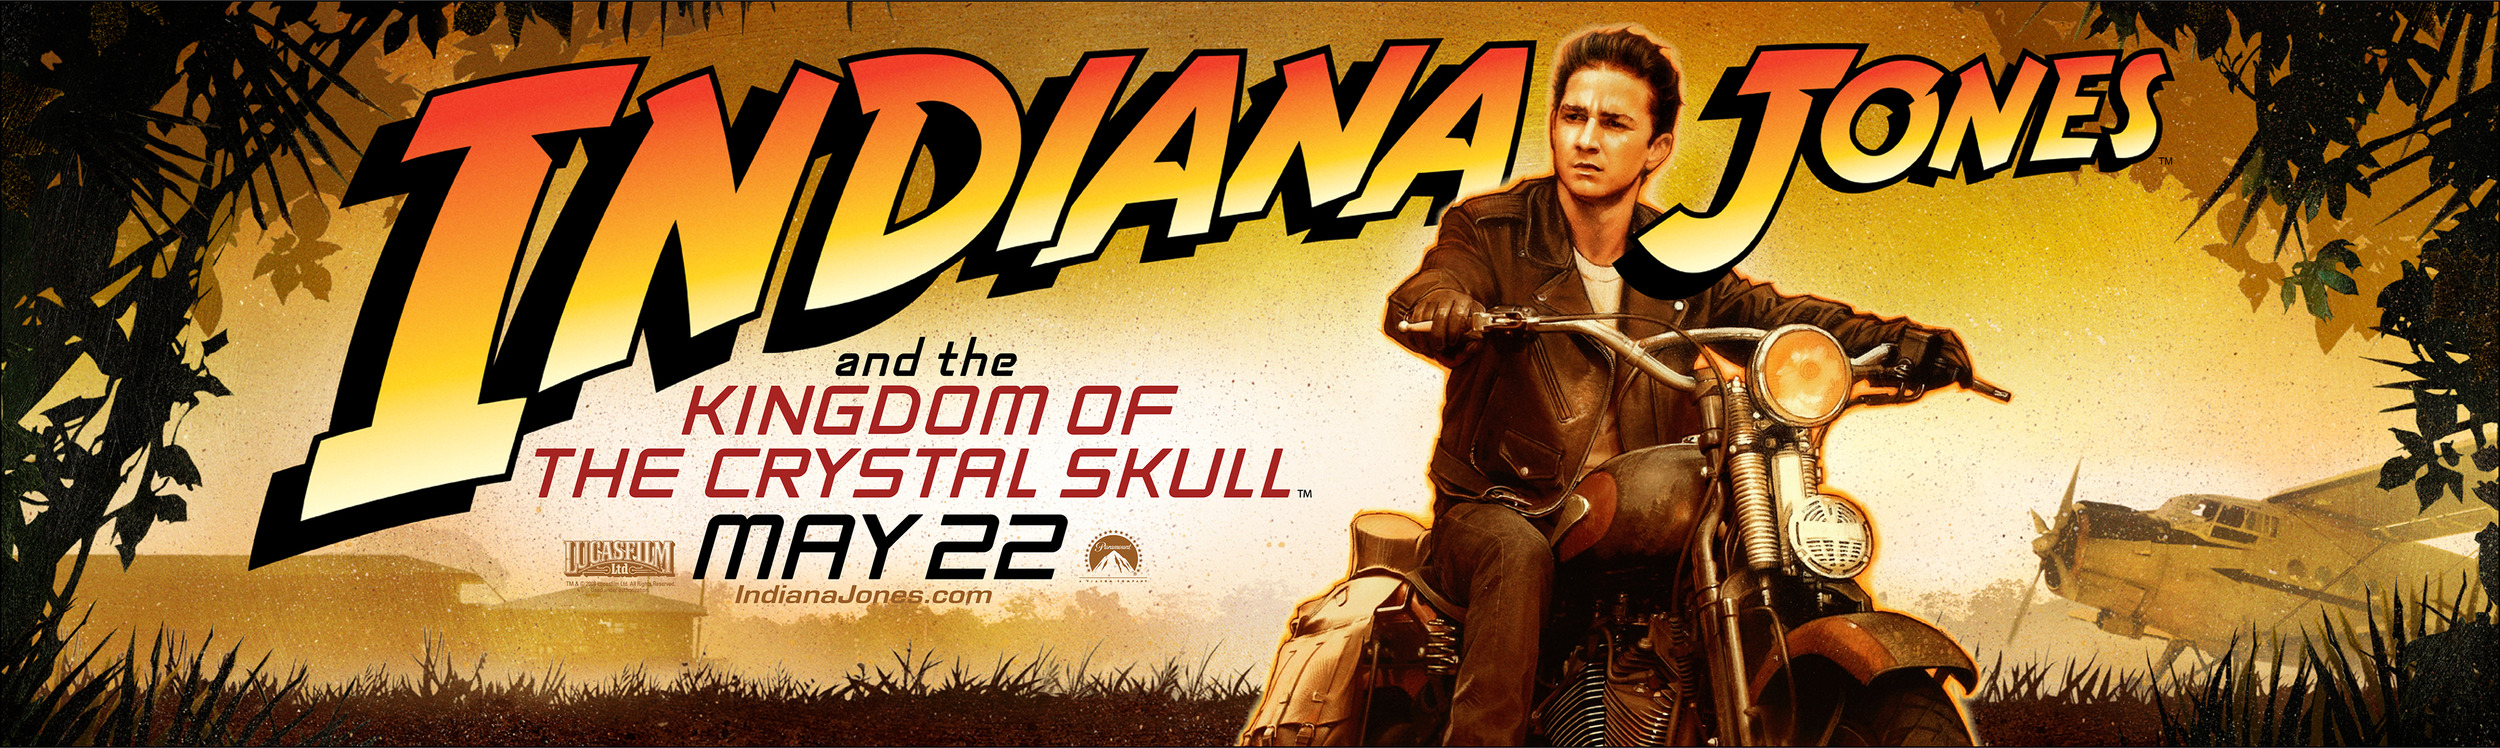 Mega Sized Movie Poster Image for Indiana Jones and the Kingdom of the Crystal Skull (#11 of 11)